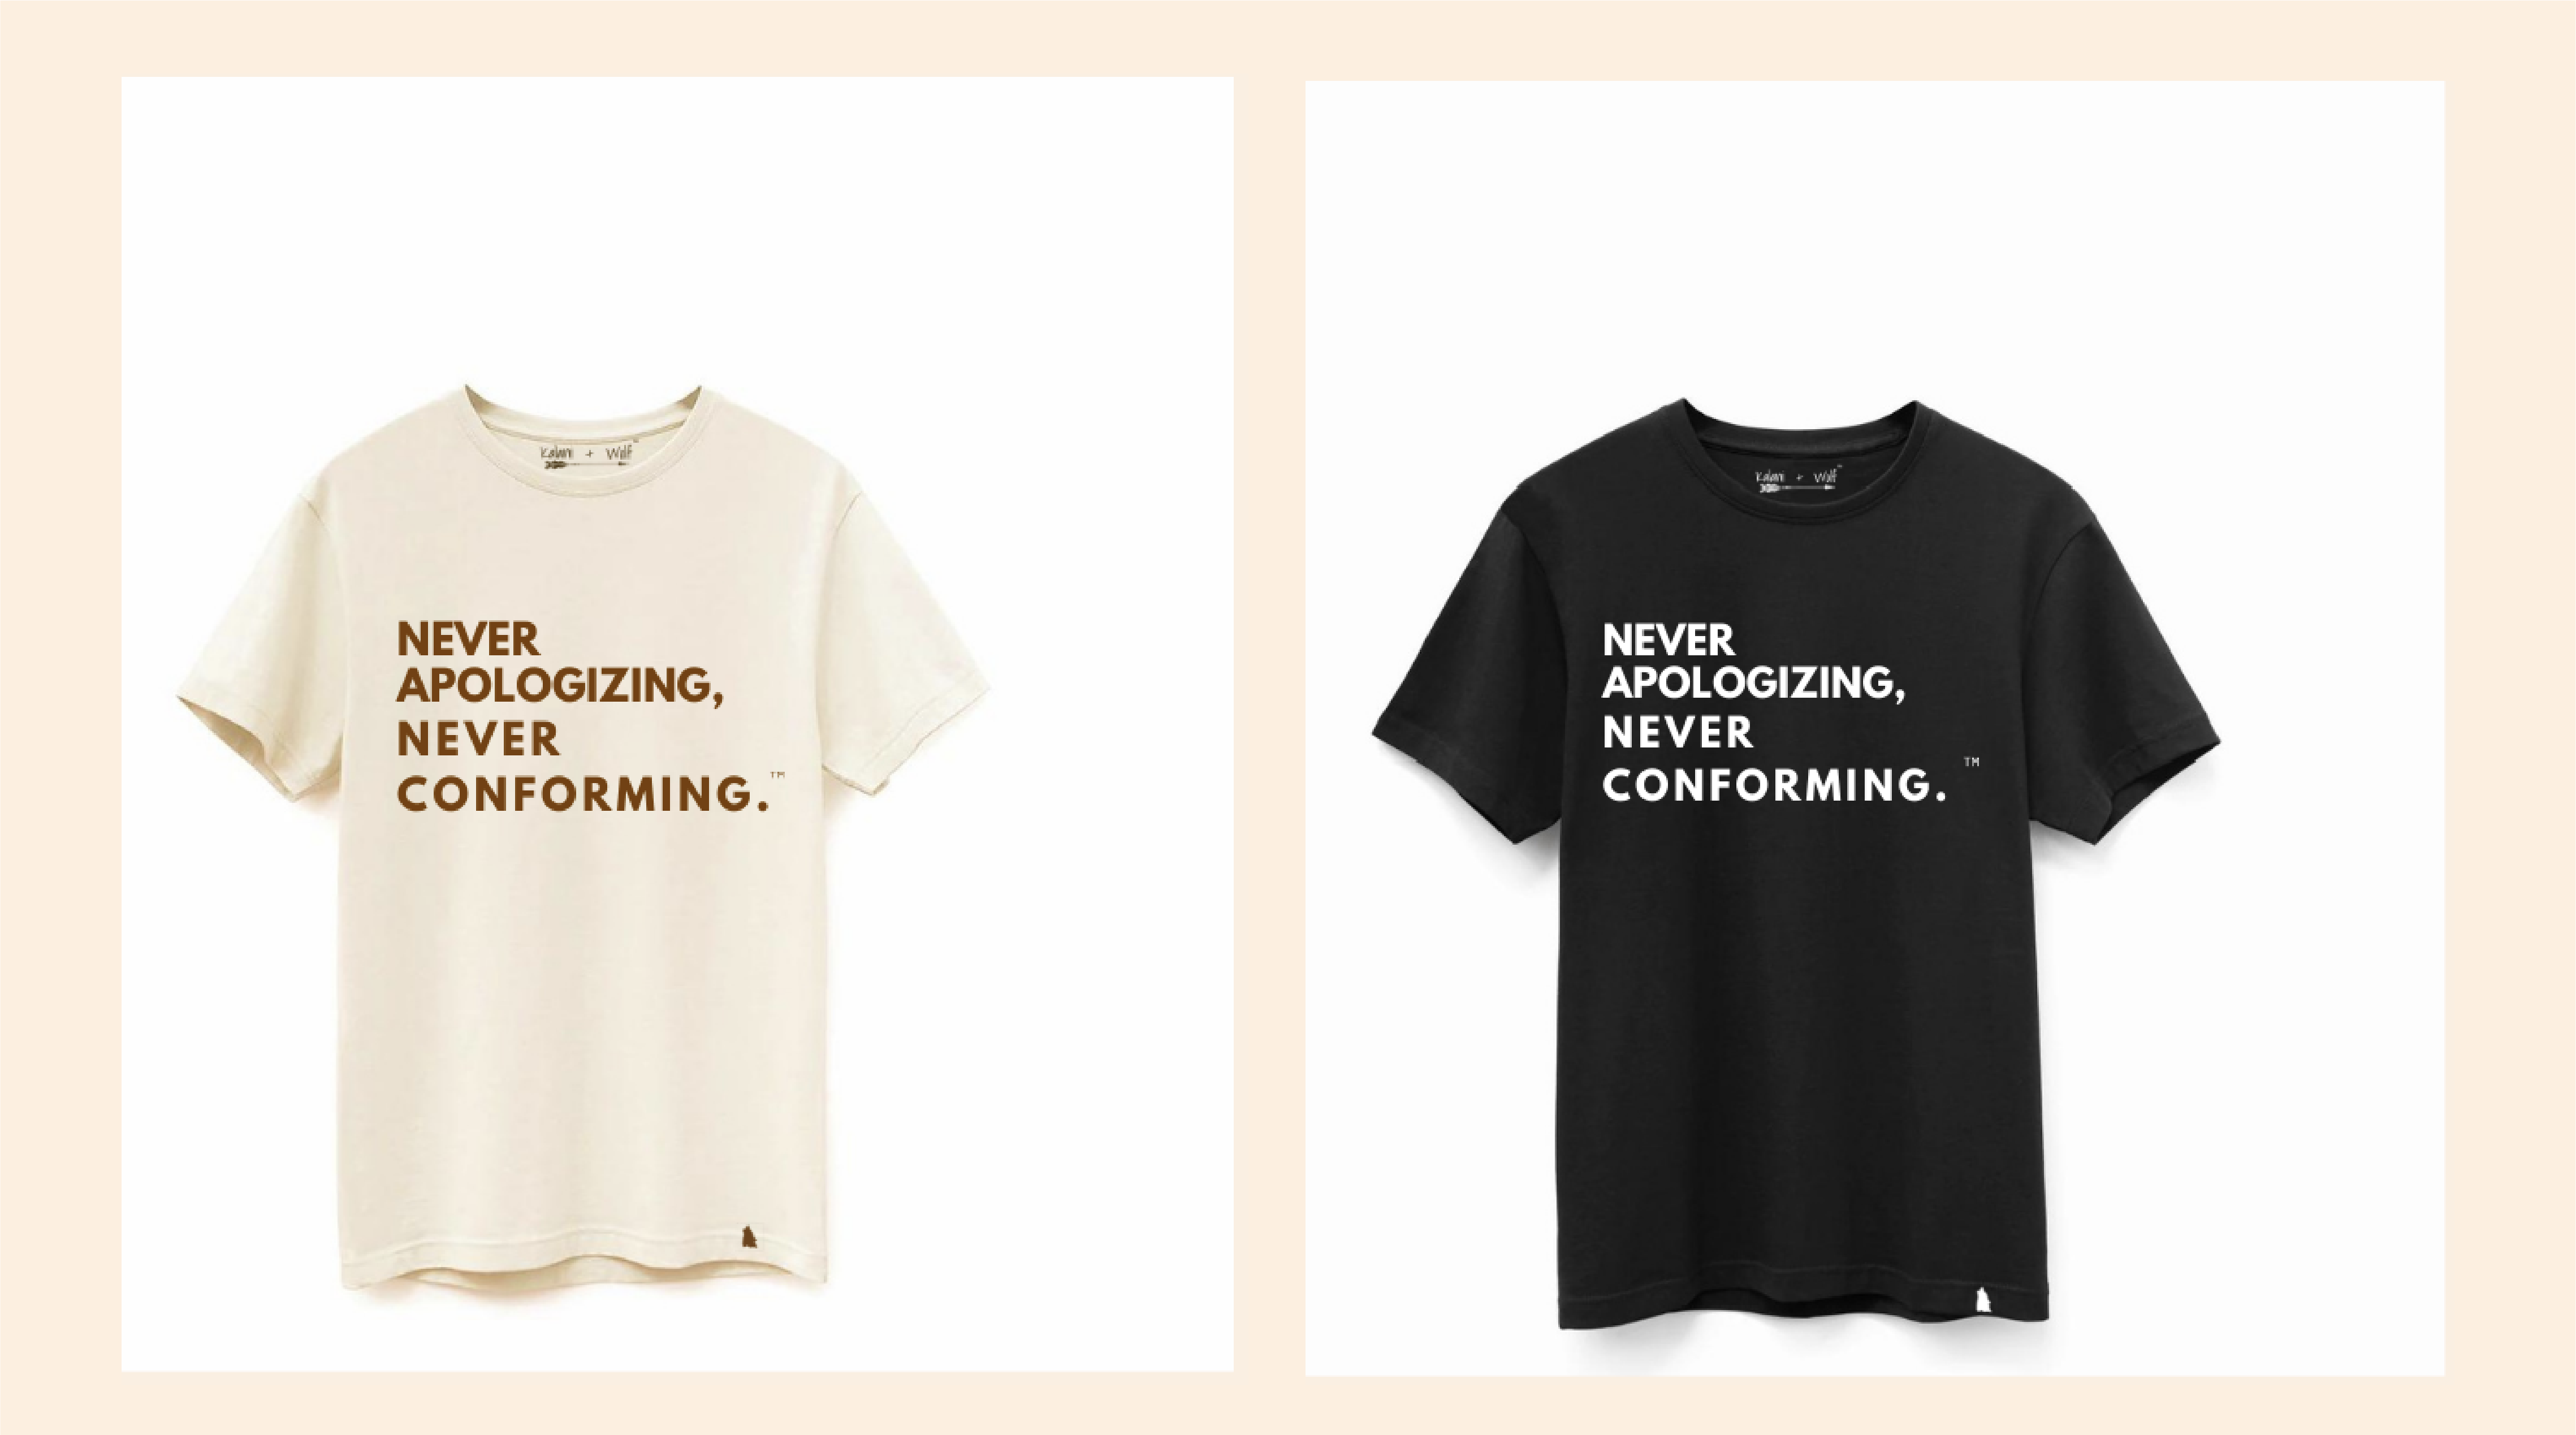 kalani and wolf never apologizing never conforming tees in natural and black supima cotton ifundwomen crowdfunding campaign